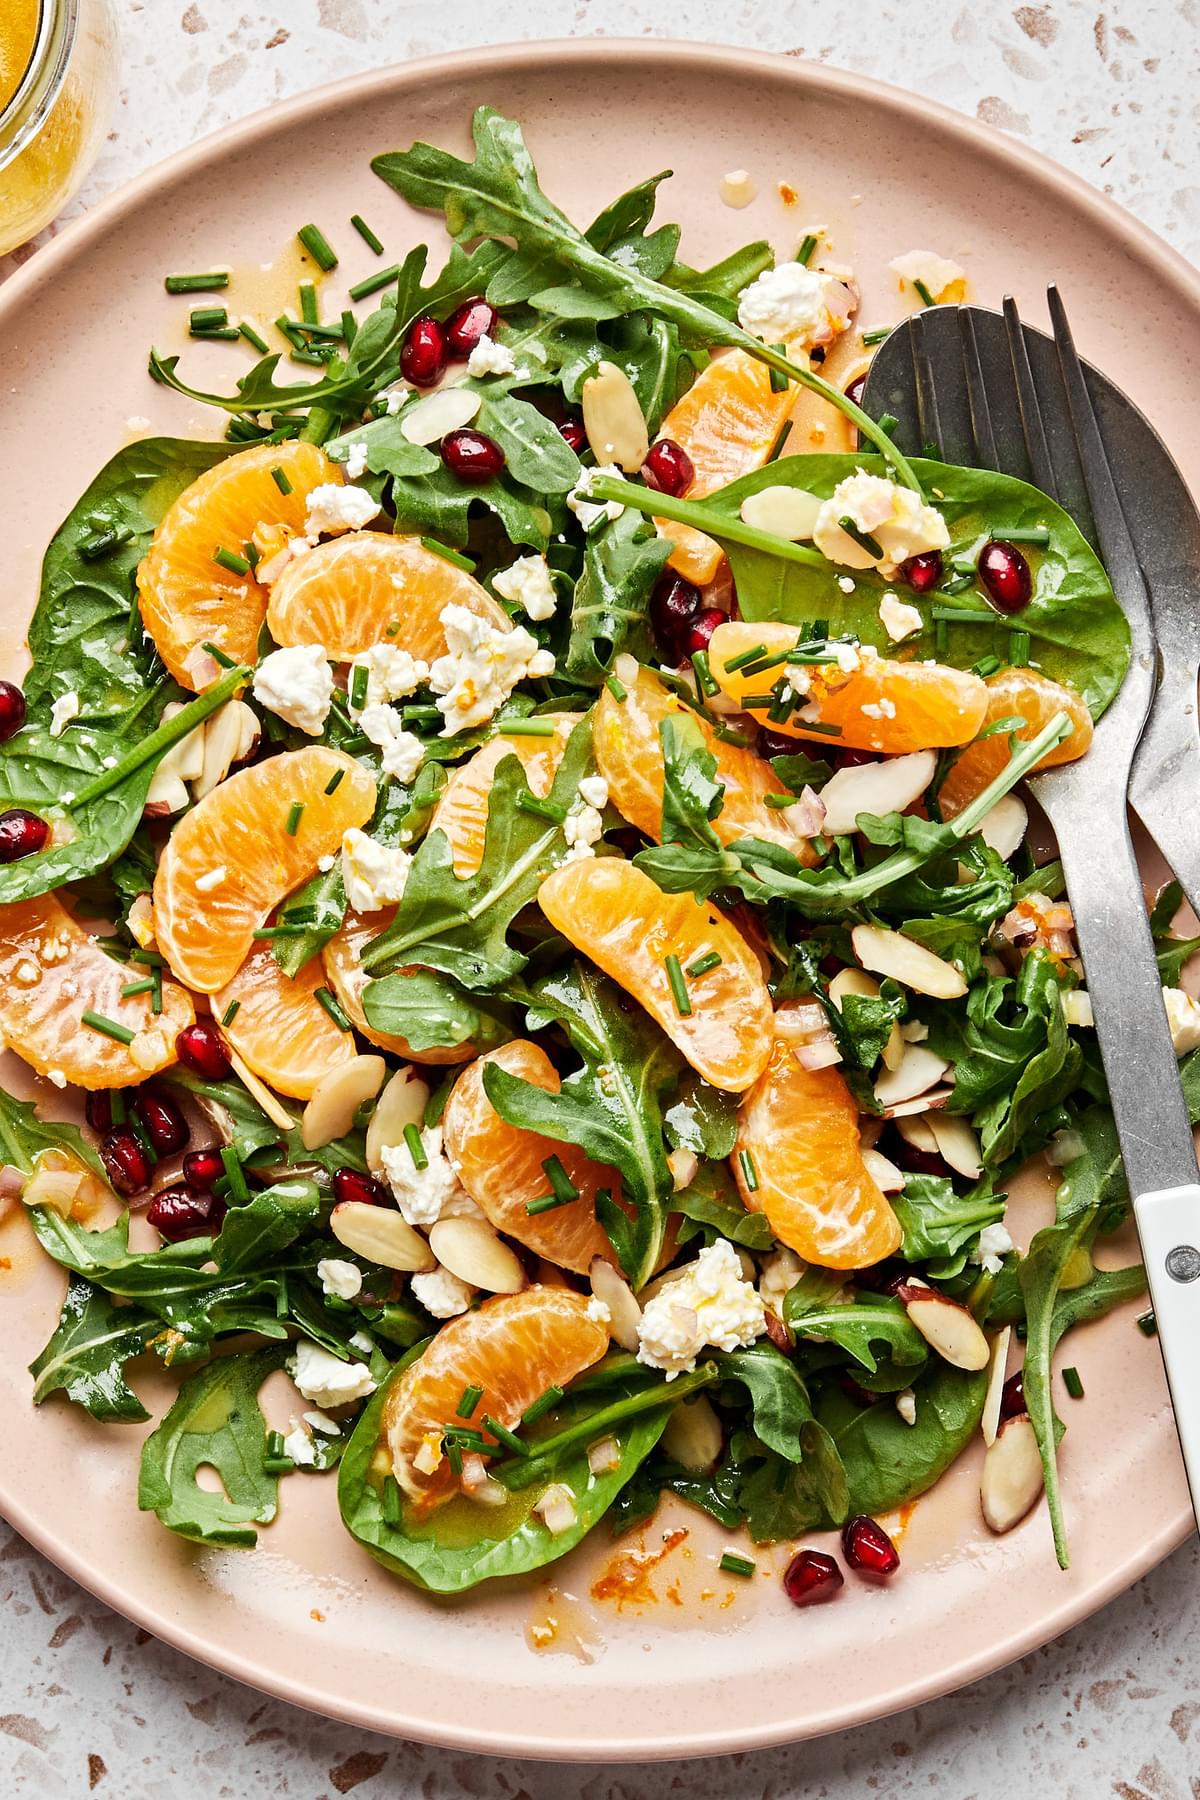 Christmas Salad on a platter made with spinach, arugula, feta, clementines, pomegranates, almond, chives and citrus dressing